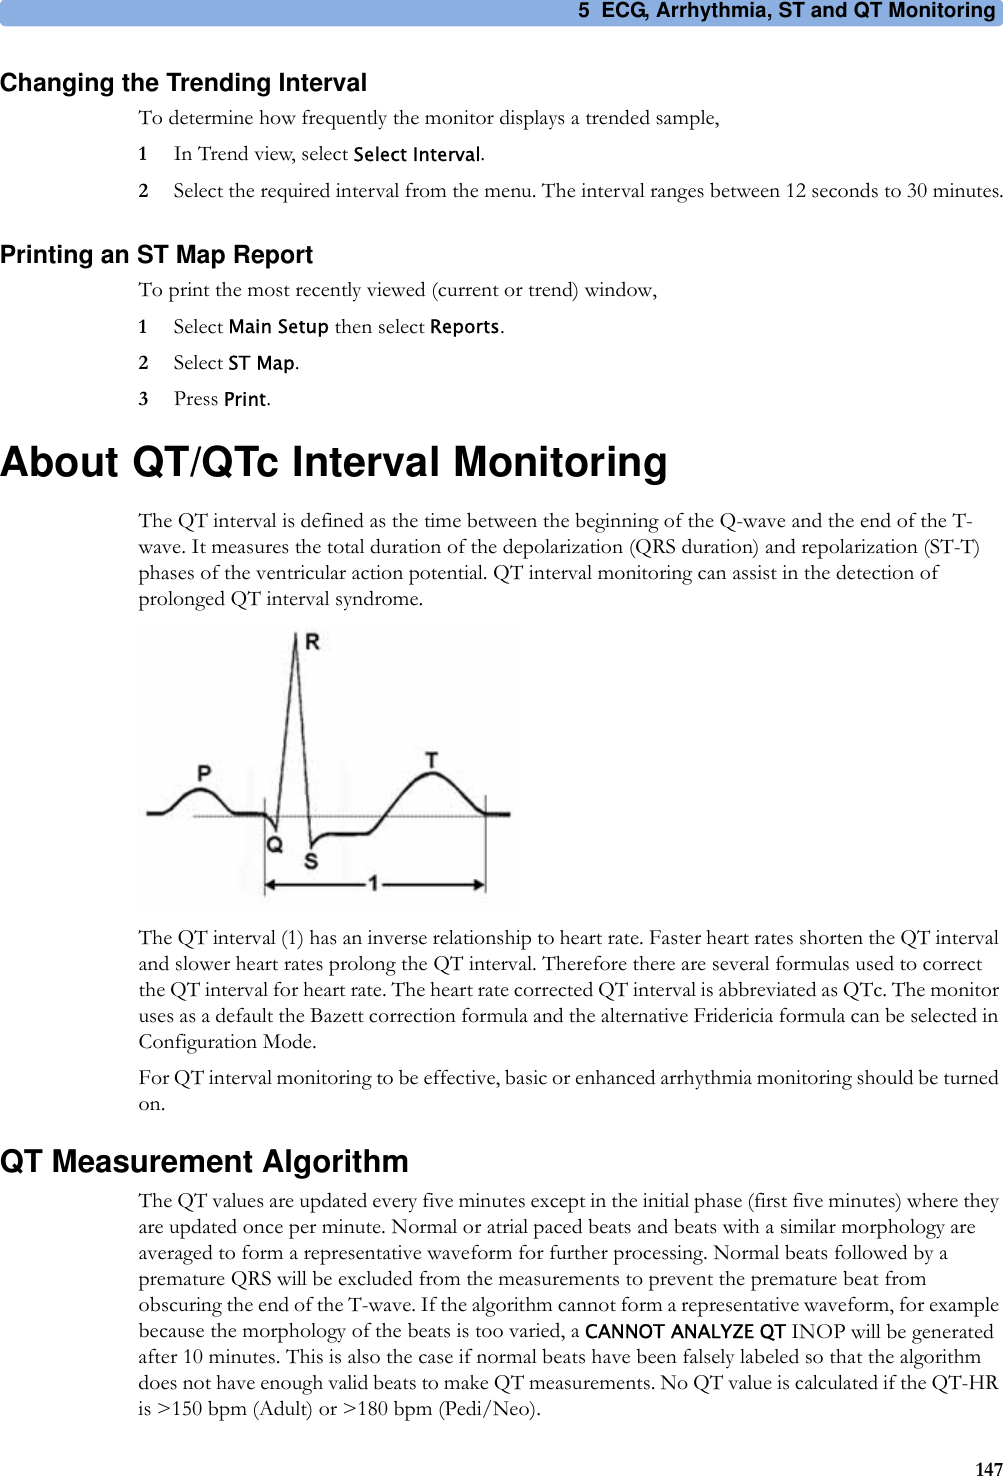 5 ECG, Arrhythmia, ST and QT Monitoring147Changing the Trending IntervalTo determine how frequently the monitor displays a trended sample,1In Trend view, select Select Interval.2Select the required interval from the menu. The interval ranges between 12 seconds to 30 minutes.Printing an ST Map ReportTo print the most recently viewed (current or trend) window,1Select Main Setup then select Reports.2Select ST Map.3Press Print.About QT/QTc Interval MonitoringThe QT interval is defined as the time between the beginning of the Q-wave and the end of the T-wave. It measures the total duration of the depolarization (QRS duration) and repolarization (ST-T) phases of the ventricular action potential. QT interval monitoring can assist in the detection of prolonged QT interval syndrome.The QT interval (1) has an inverse relationship to heart rate. Faster heart rates shorten the QT interval and slower heart rates prolong the QT interval. Therefore there are several formulas used to correct the QT interval for heart rate. The heart rate corrected QT interval is abbreviated as QTc. The monitor uses as a default the Bazett correction formula and the alternative Fridericia formula can be selected in Configuration Mode.For QT interval monitoring to be effective, basic or enhanced arrhythmia monitoring should be turned on.QT Measurement AlgorithmThe QT values are updated every five minutes except in the initial phase (first five minutes) where they are updated once per minute. Normal or atrial paced beats and beats with a similar morphology are averaged to form a representative waveform for further processing. Normal beats followed by a premature QRS will be excluded from the measurements to prevent the premature beat from obscuring the end of the T-wave. If the algorithm cannot form a representative waveform, for example because the morphology of the beats is too varied, a CANNOT ANALYZE QT INOP will be generated after 10 minutes. This is also the case if normal beats have been falsely labeled so that the algorithm does not have enough valid beats to make QT measurements. No QT value is calculated if the QT-HR is &gt;150 bpm (Adult) or &gt;180 bpm (Pedi/Neo).